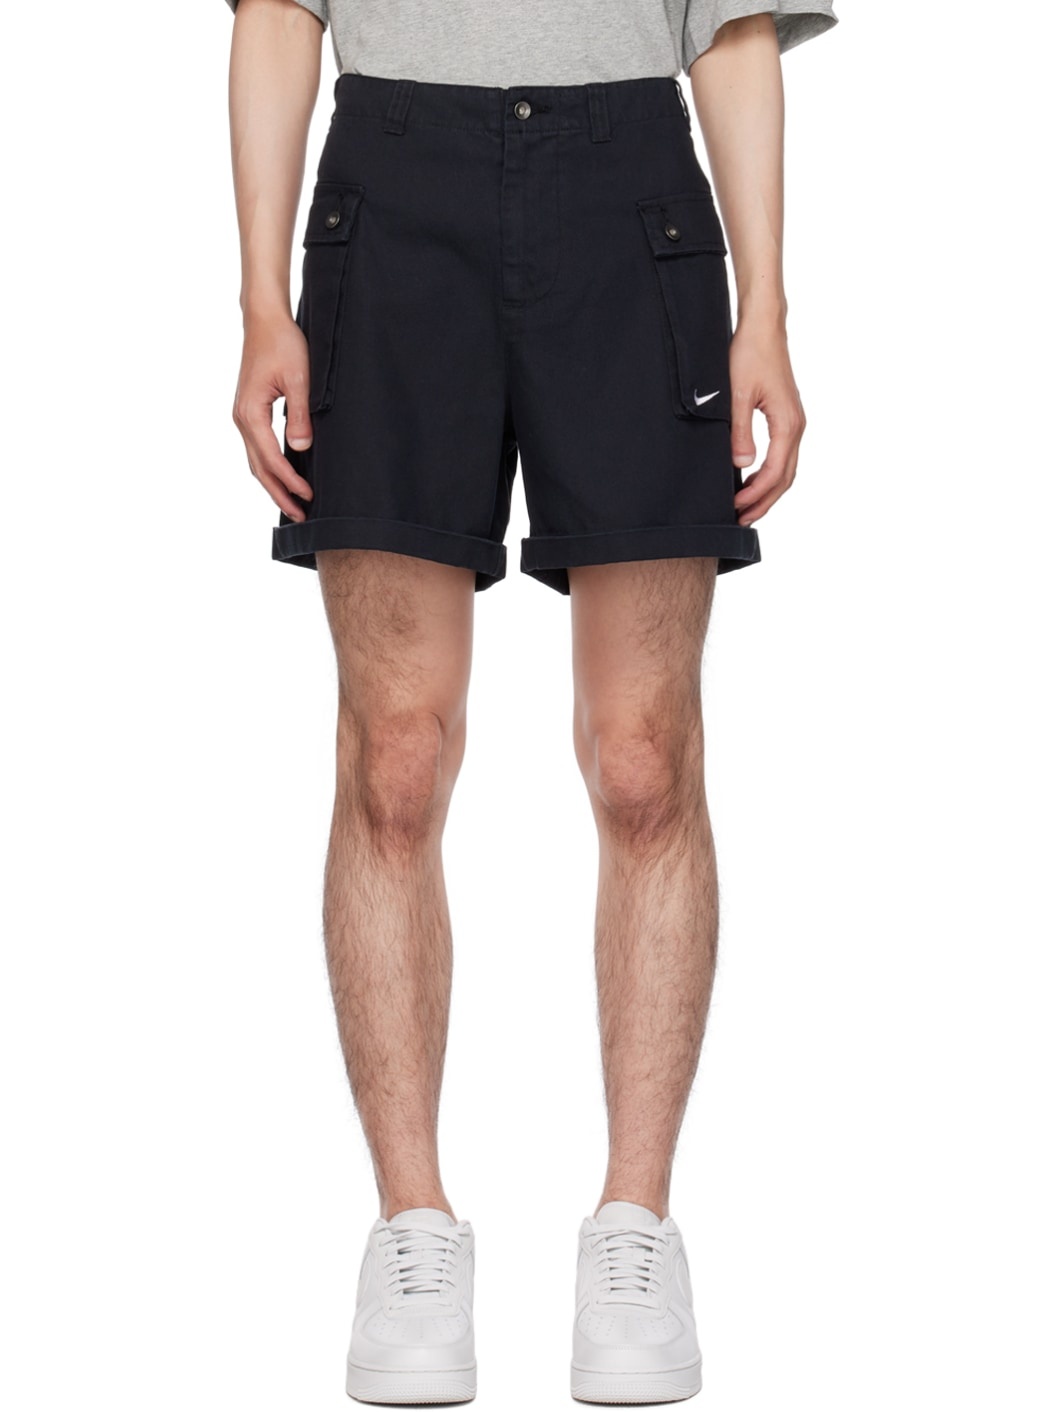 Black Embroidered Cargo Shorts - 1